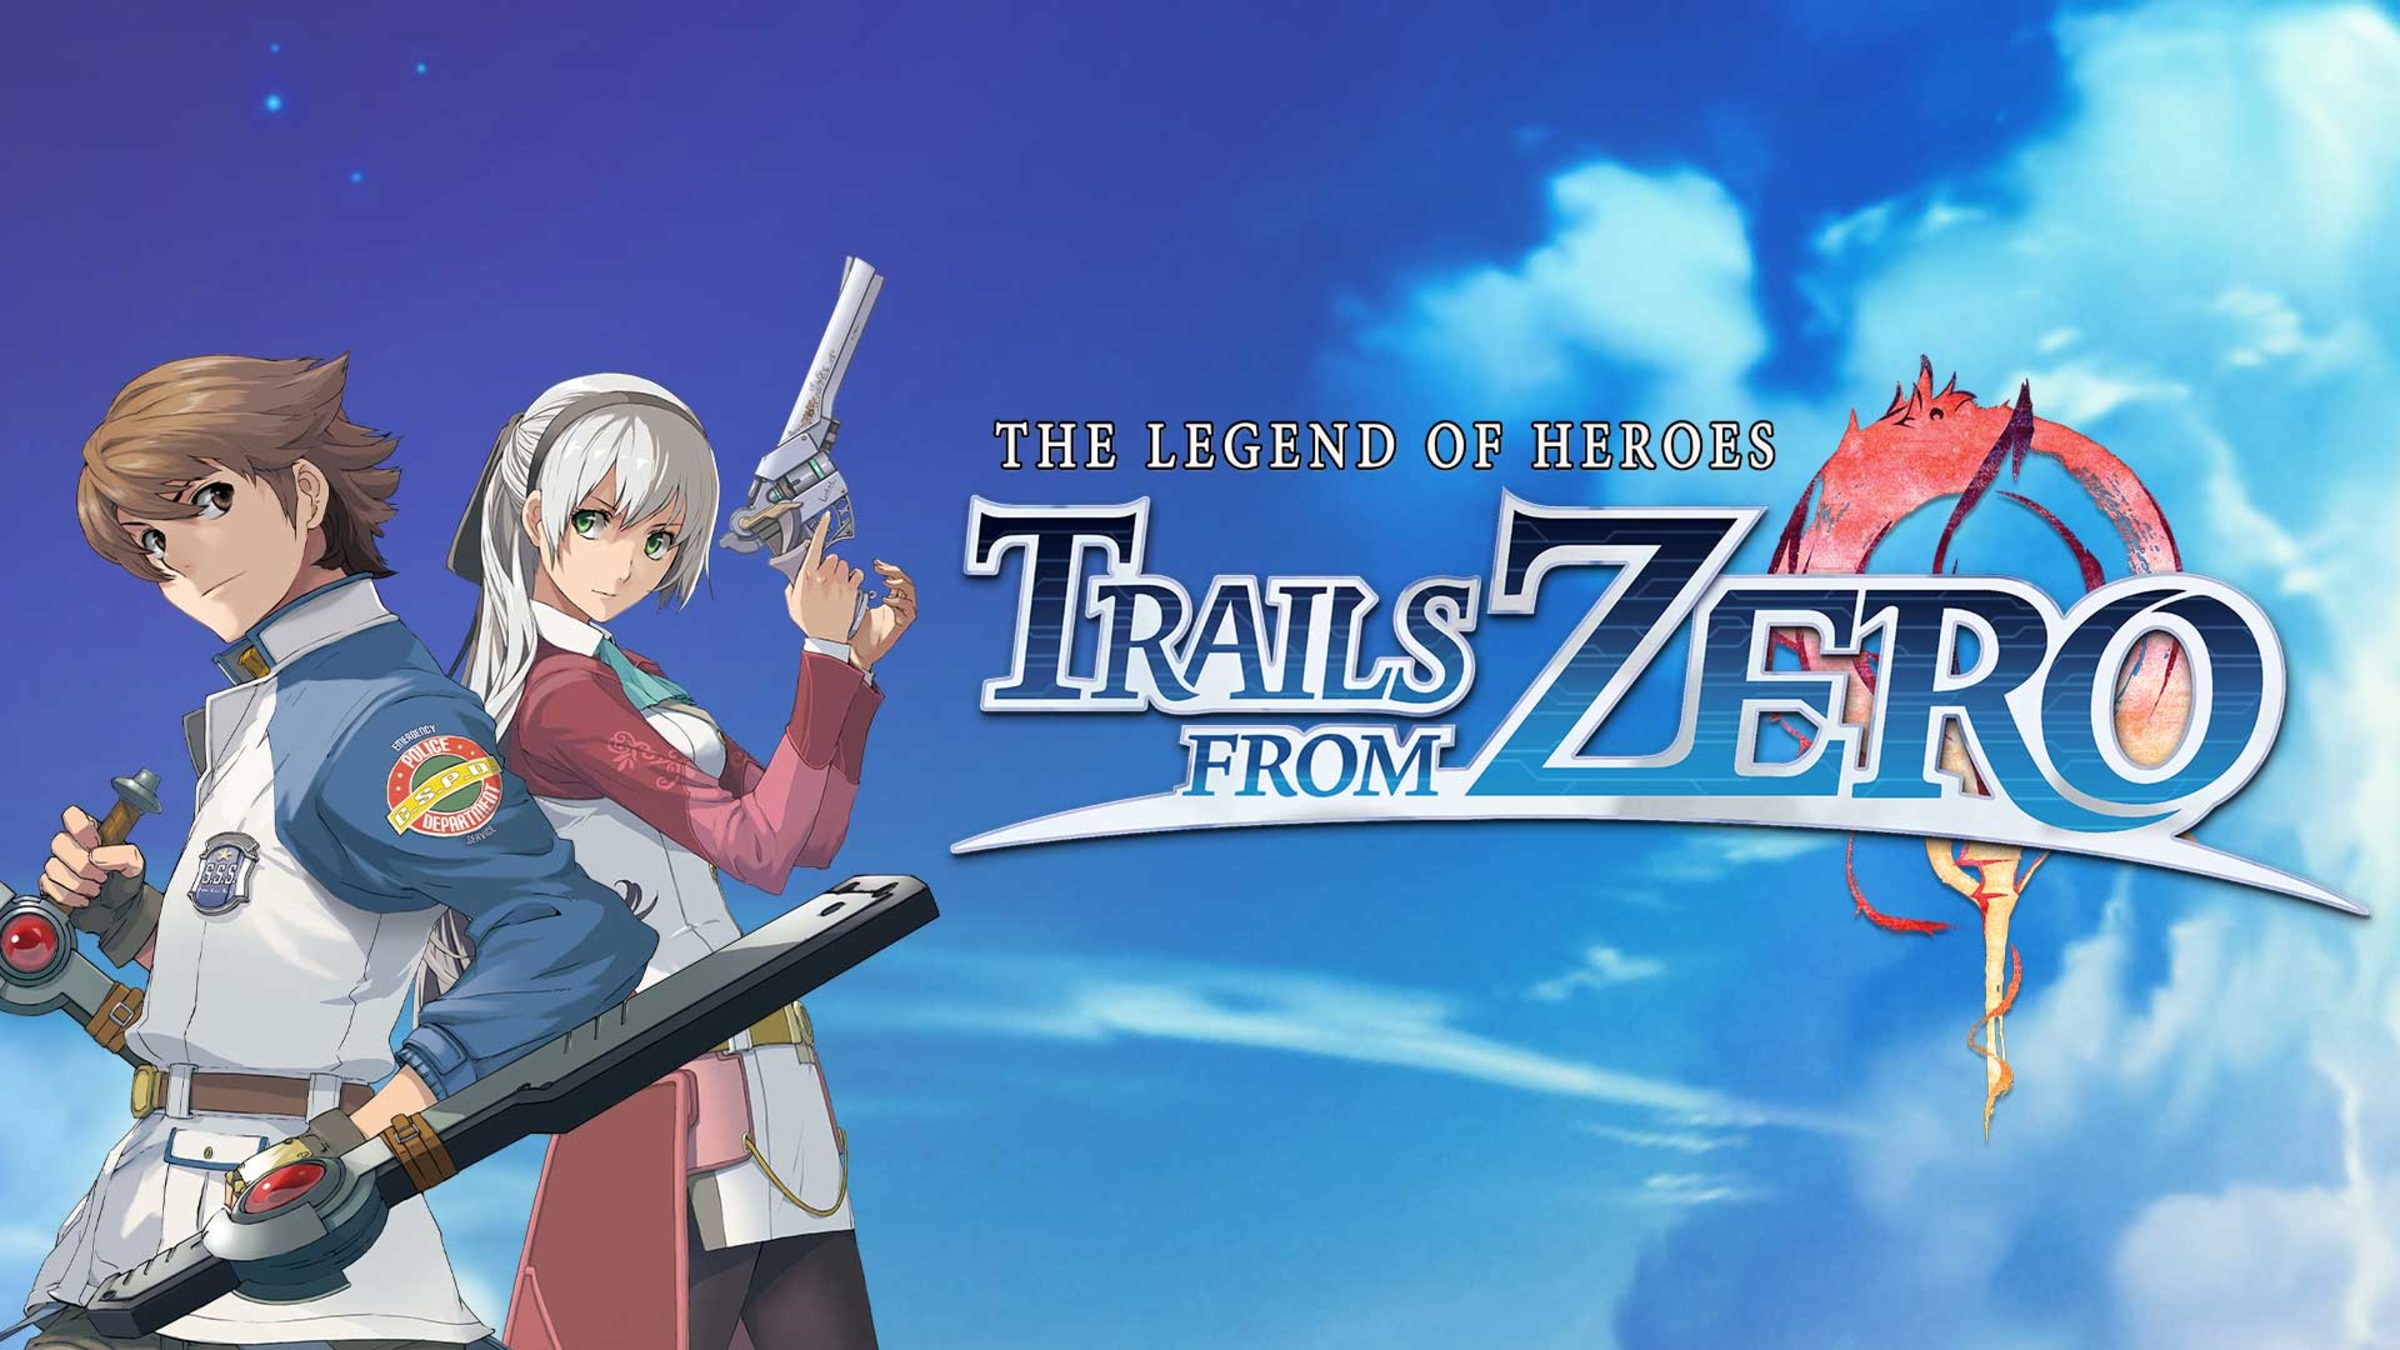 https://assets.nintendo.com/image/upload/c_fill,w_1200/q_auto:best/f_auto/dpr_2.0/ncom/en_US/games/switch/t/the-legend-of-heroes-trails-from-zero-switch/